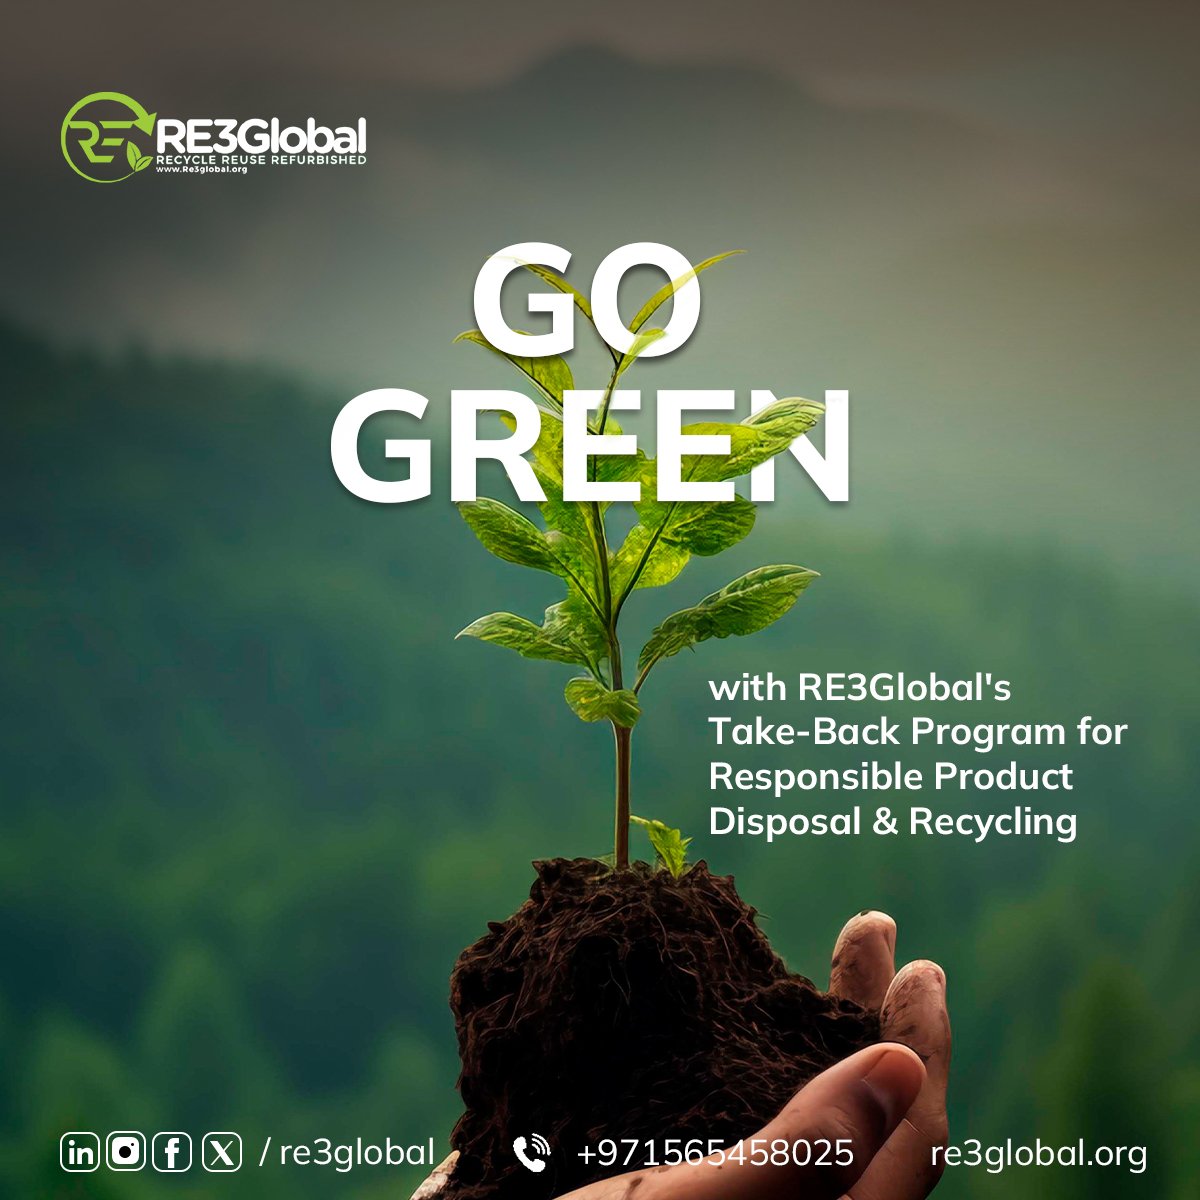 Join RE3Global's green movement with our take-back program for responsible product disposal. Our reverse logistics ensure compliance, facilitating electronic device recycling for a greener planet. Re3global.org

#electronicwaste #recycle #reuse #refurbish #uae #dubai